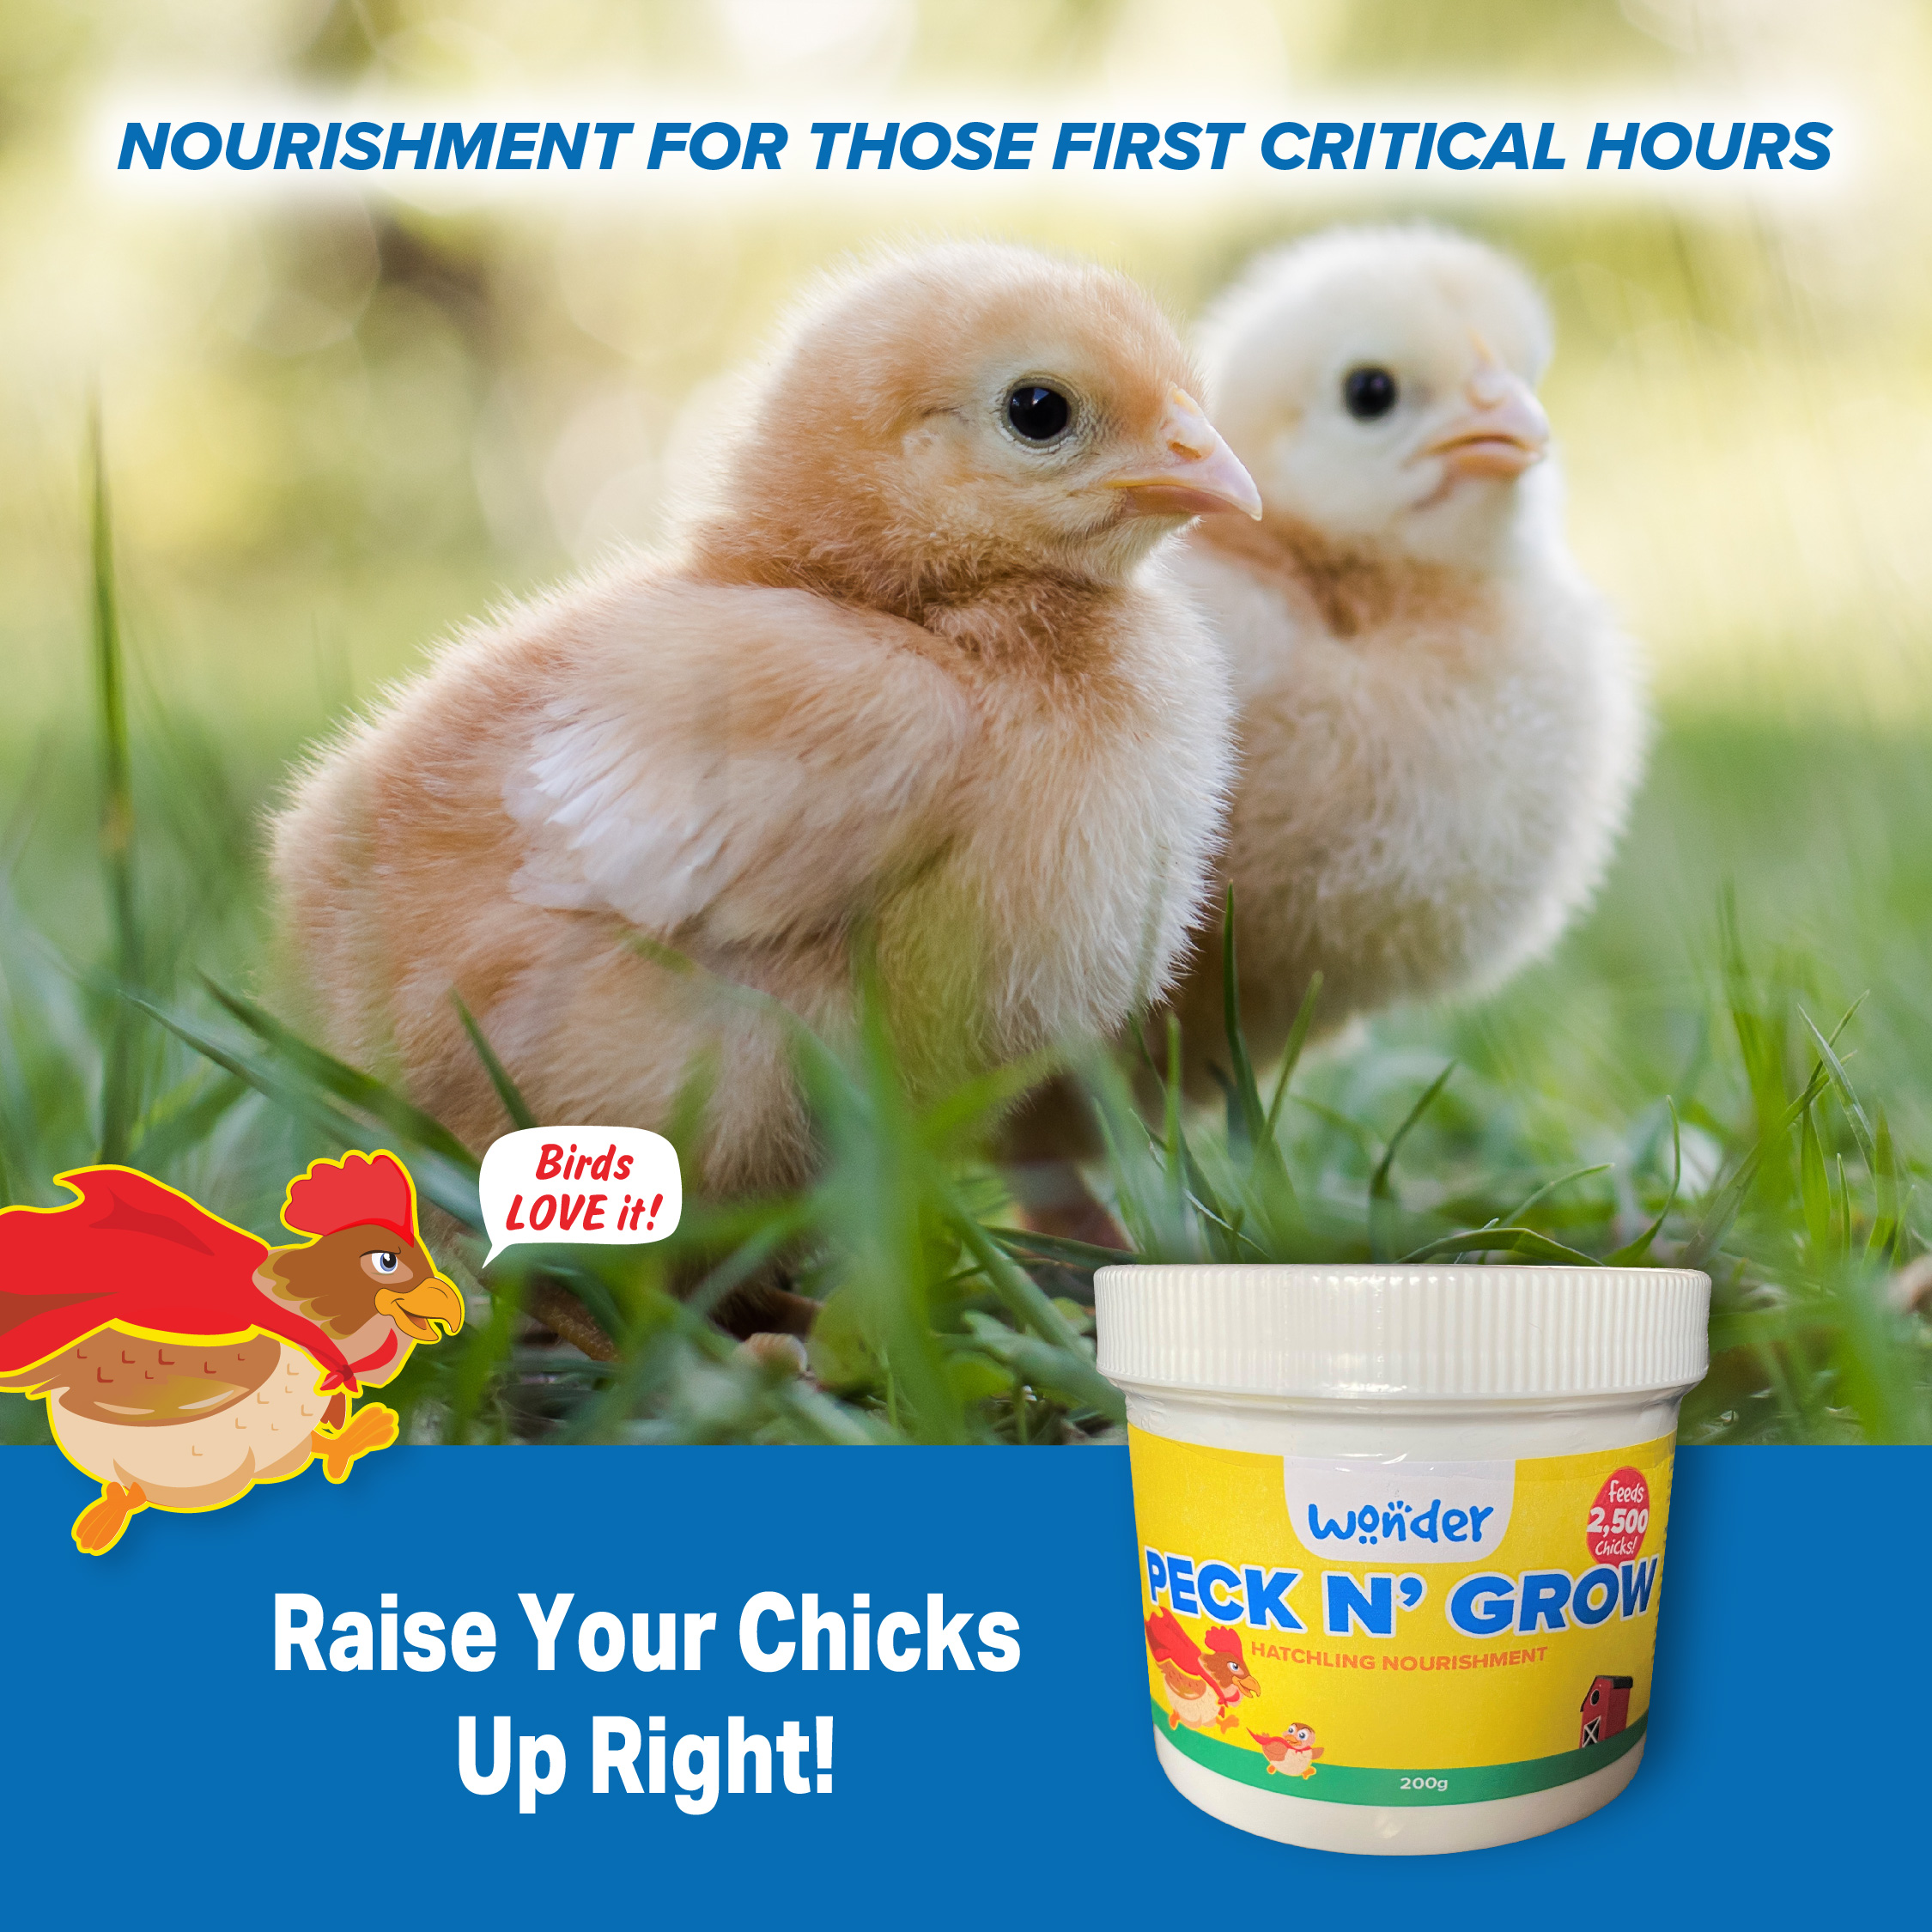 Wonder Peck N' Grow provides vital nourishment to your chicks in those first critical hours. Available at Stromberg's Chicks and Game Birds.